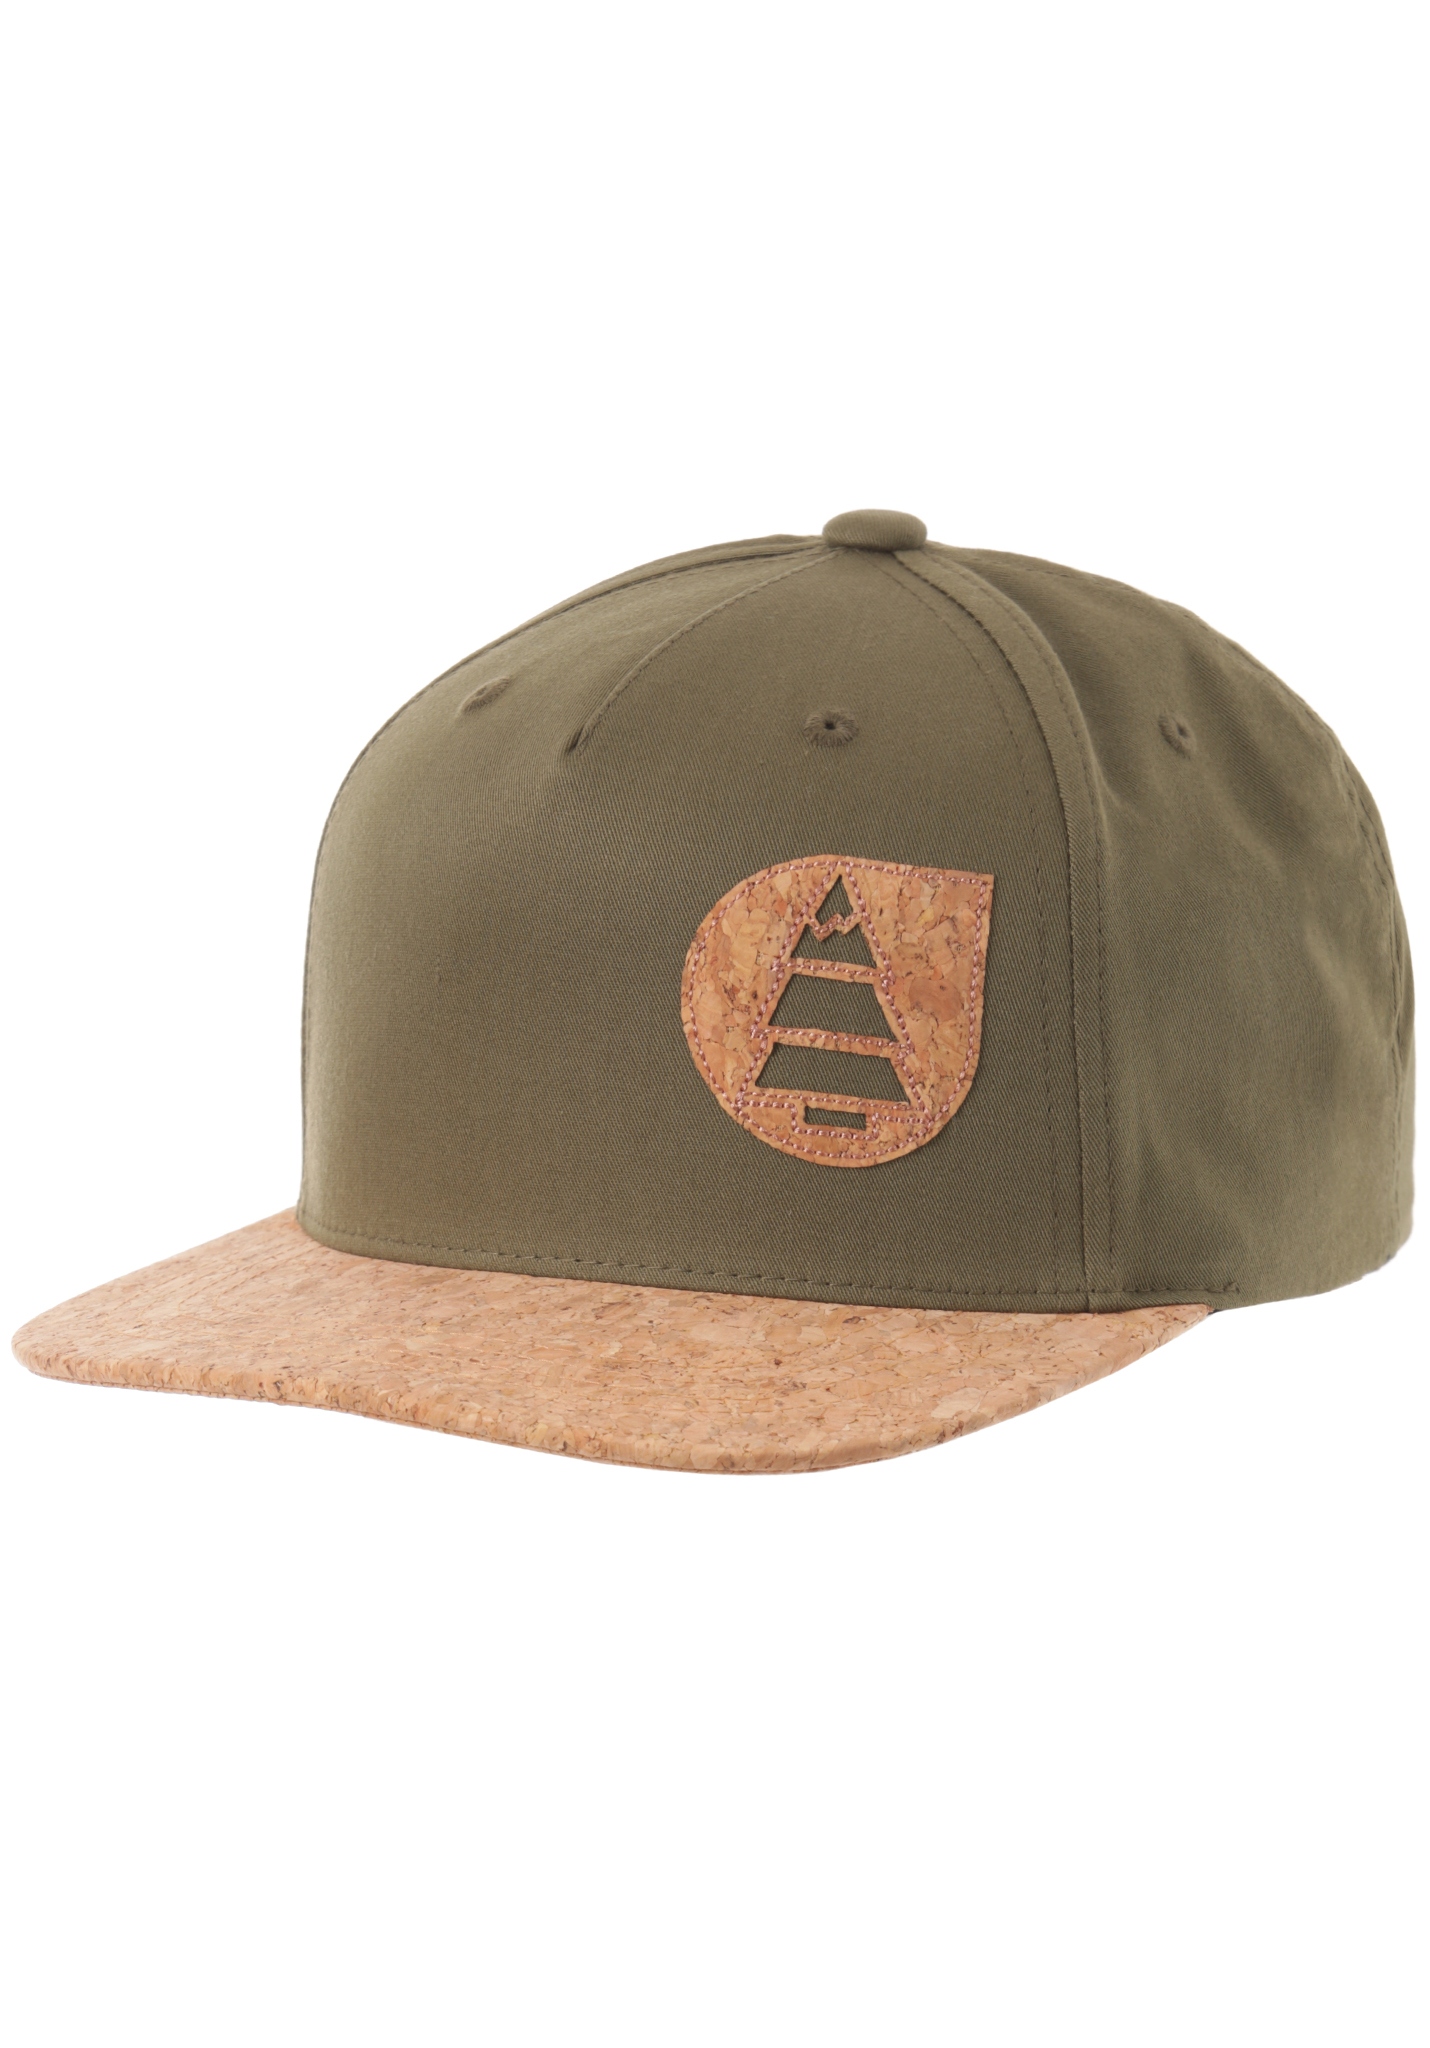 Picture Narrow Snapback Cap military One Size